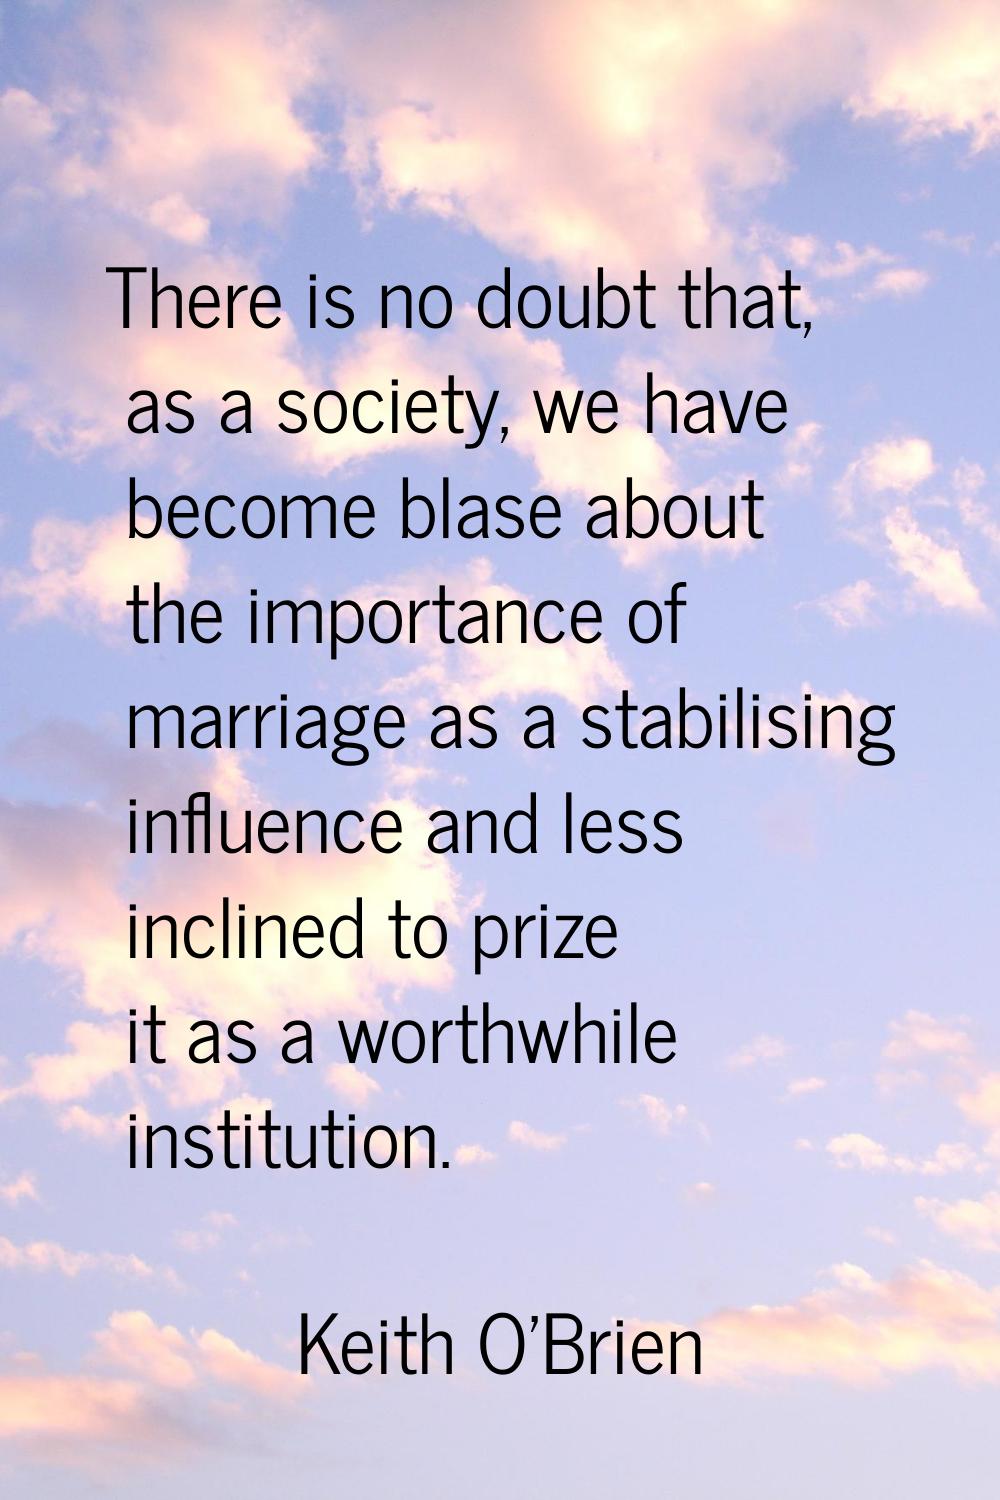 There is no doubt that, as a society, we have become blase about the importance of marriage as a st